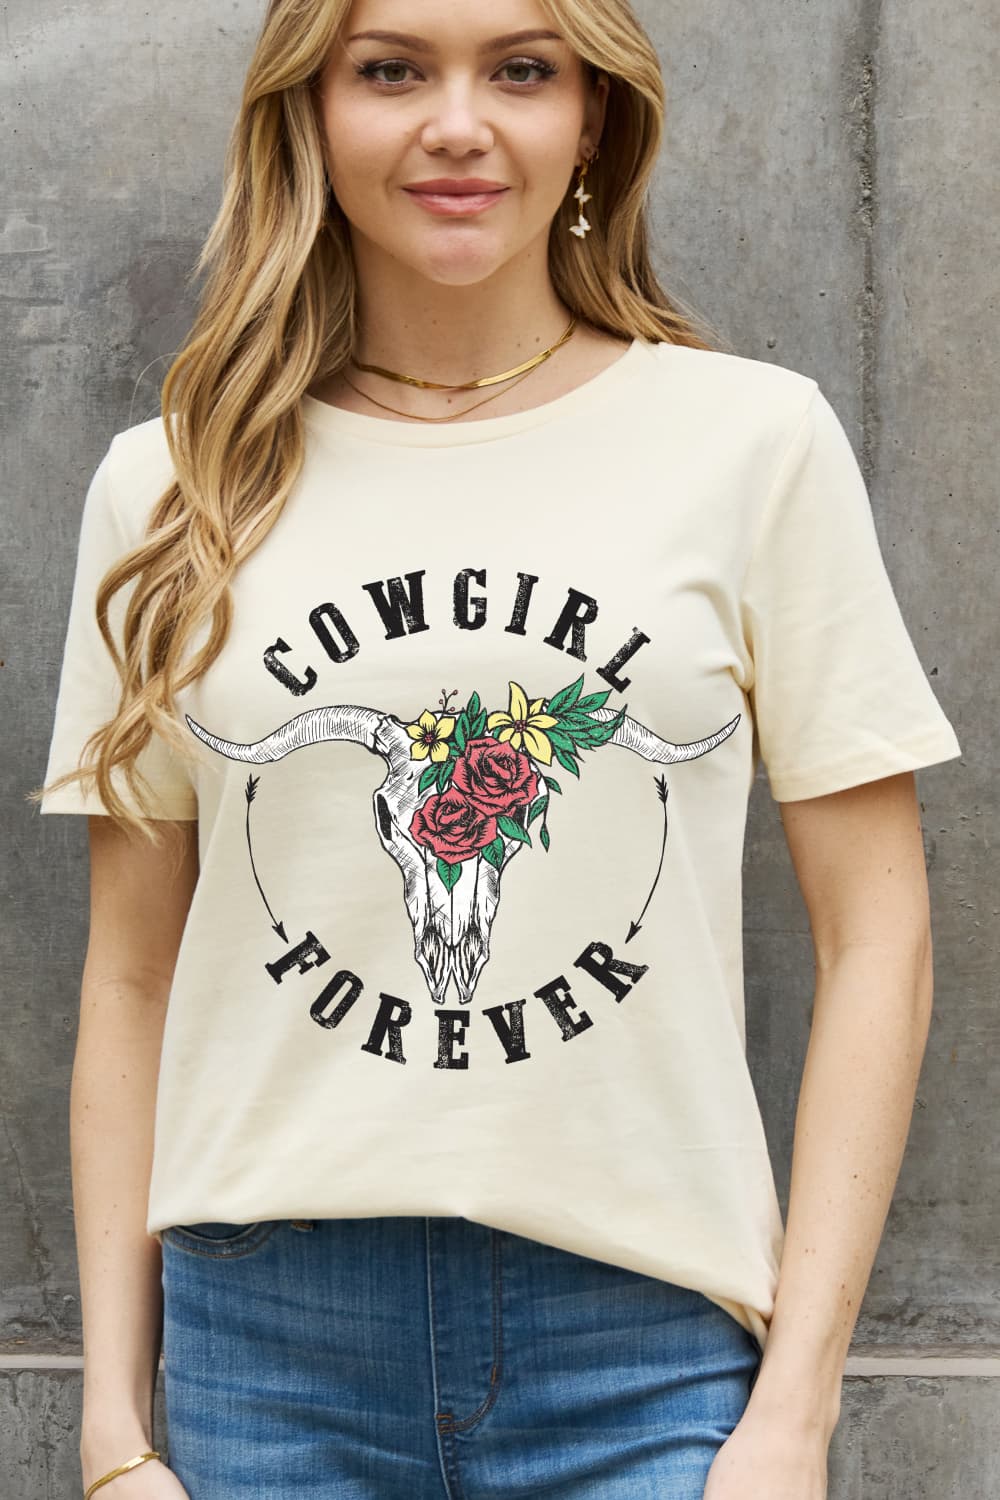 Simply Love Full Size COWGIRL FOREVER Graphic Cotton Tee - AllIn Computer